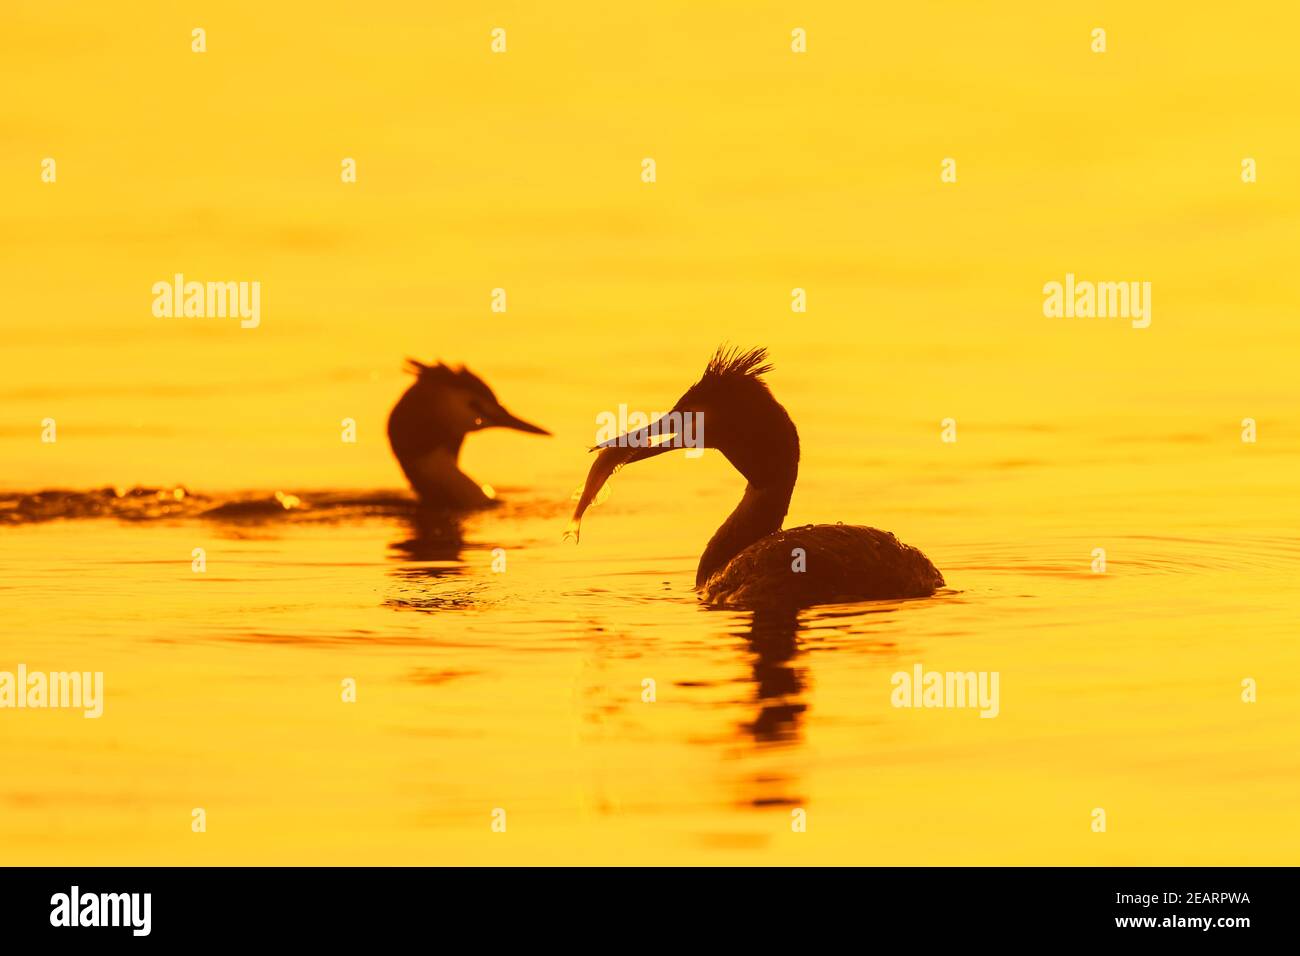 Great crested grebe (Podiceps cristatus) in breeding plumage swimming in lake / pond with caught fish in beak silhouetted against sunrise in spring Stock Photo